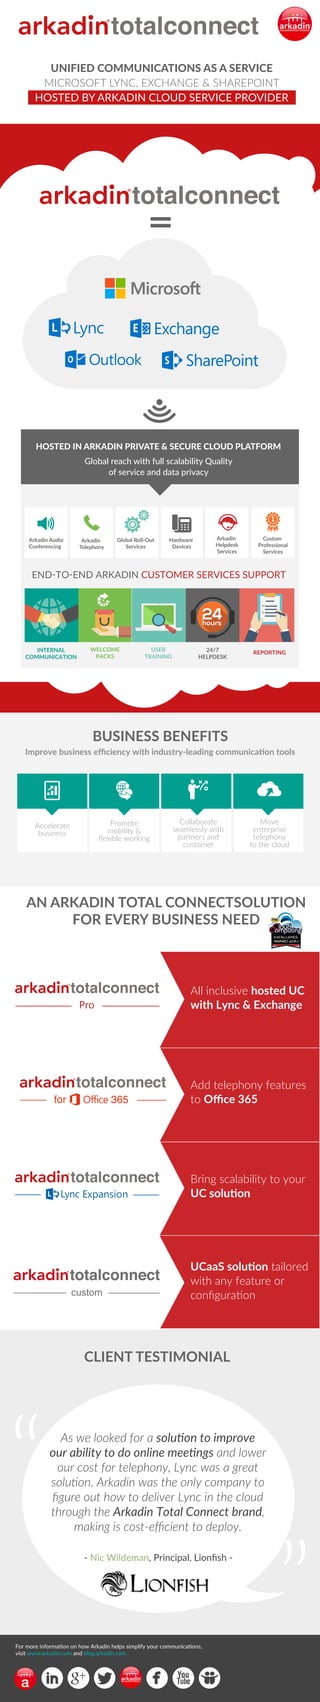 UNIFIED COMMUNICATIONS AS A SERVICE 
MICROSOFT LYNC, EXCHANGE & SHAREPOINT 
HOSTED BY ARKADIN CLOUD SERVICE PROVIDER 
HOSTED IN ARKADIN PRIVATE & SECURE CLOUD PLATFORM 
Global reach with full scalability Quality 
of service and data privacy 
Hybrid 
Deployment 
Office 365 / Lync server 
END-TO-END ARKADIN CUSTOMER SERVICES SUPPORT 
BUSINESS BENEFITS 
Improve business efficiency with industry-leading communication tools 
Accelerate 
business 
Promote 
mobility & 
flexible working 
Collaborate 
seamlessly with 
partners and 
customer 
AN ARKADIN TOTAL CONNECTSOLUTION 
FOR EVERY BUSINESS NEED 
Add telephony features 
to Office 365 
CLIENT TESTIMONIAL 
For more information on how Arkadin helps simplify your communications, 
visit www.arkadin.com and blog.arkadin.com 
a 
Move 
enterprise 
telephony 
to the cloud 
All inclusive hosted UC 
with Lync & Exchange 
Bring scalability to your 
UC solution 
UCaaS solution tailored 
with any feature or 
configuration 
“ 
“ 
As we looked for a solution to improve 
our ability to do online meetings and lower 
our cost for telephony, Lync was a great 
solution. Arkadin was the only company to 
figure out how to deliver Lync in the cloud 
through the Arkadin Total Connect brand, 
making is cost-efficient to deploy. 
- Nic Wildeman, Principal, Lionfish - 
INTERNAL 
COMMUNICATION 
WELCOME 
PACKS 
USER 
TRAINING 
24/7 
HELPDESK 
REPORTING 
Arkadin Audio 
Conferencing 
Arkadin 
Telephony 
Hardware 
Devices 
Global Roll-Out 
Services 
Arkadin 
Helpdesk 
Services 
Custom 
Professional 
Services 
